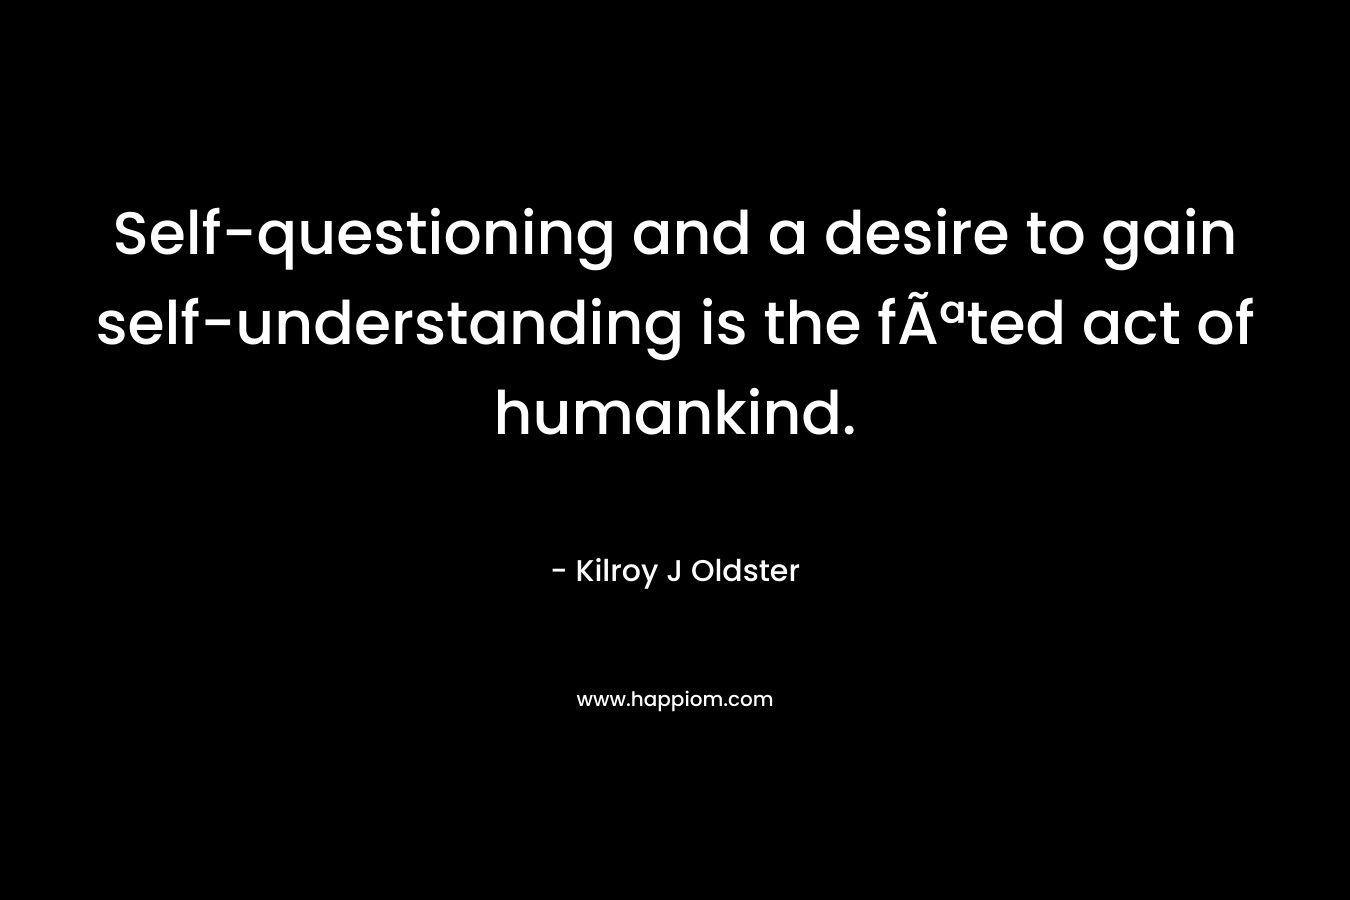 Self-questioning and a desire to gain self-understanding is the fÃªted act of humankind.